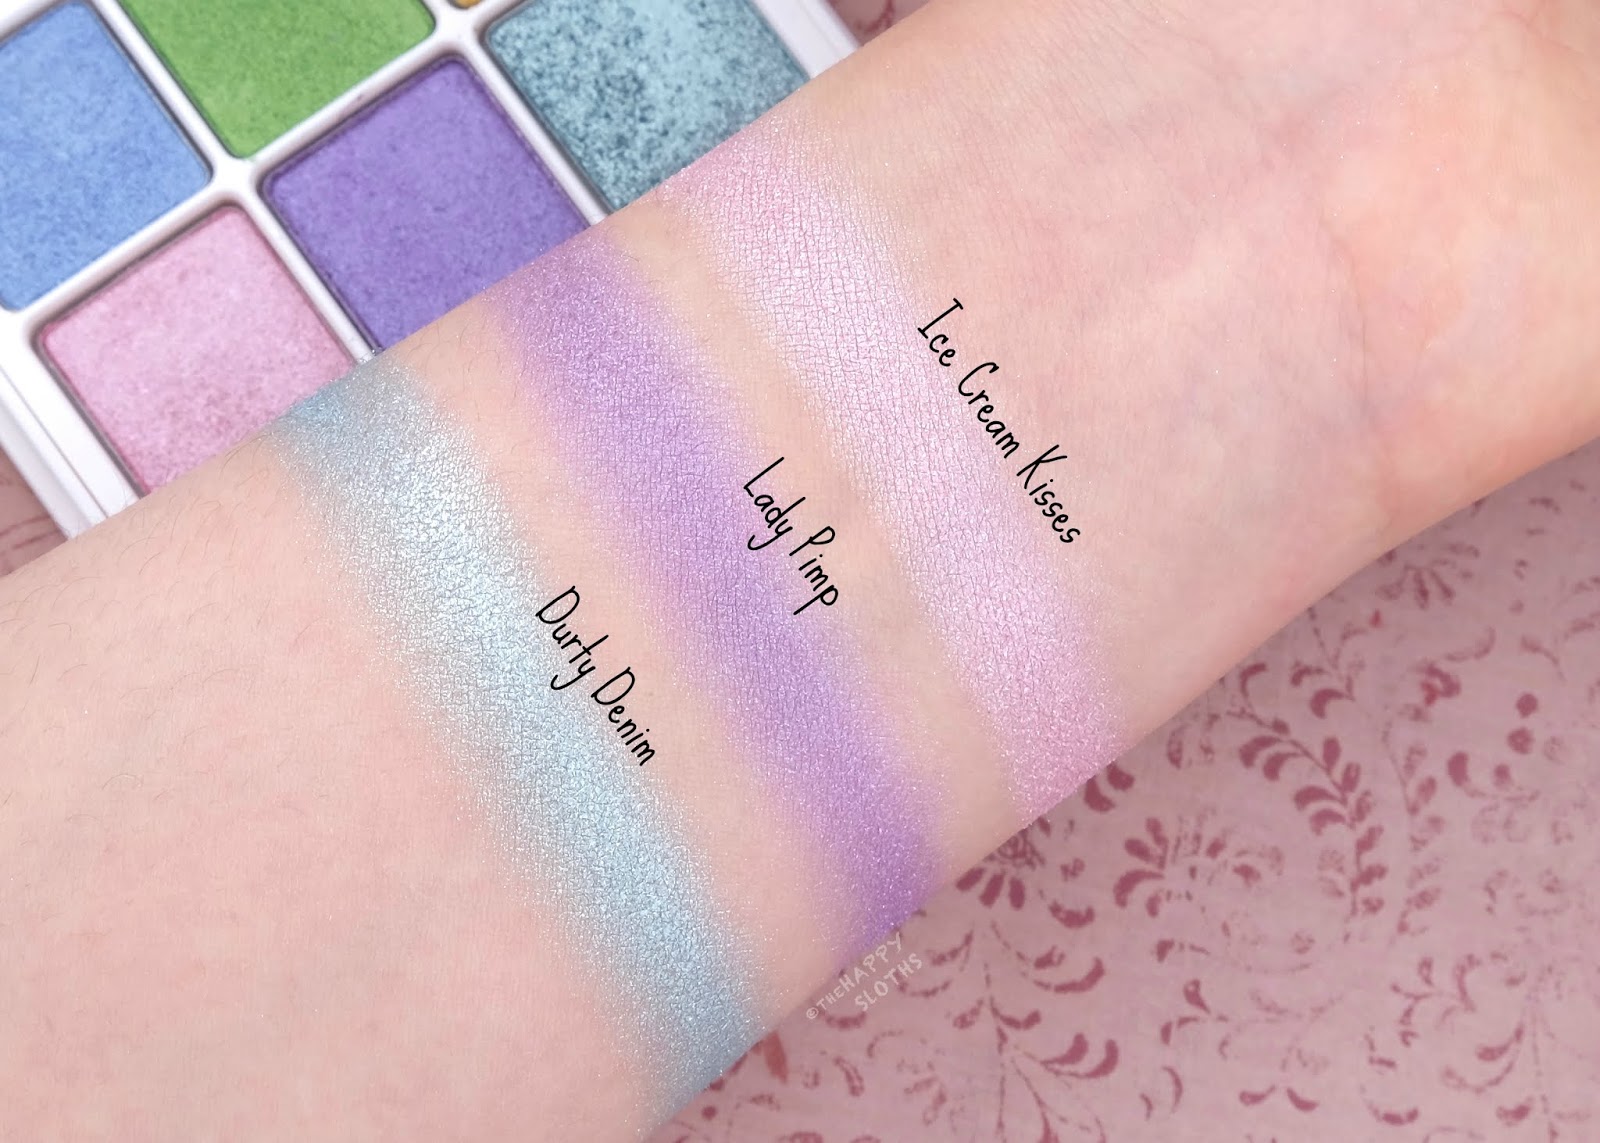 Fenty Beauty | Snap Shadows Mix & Match Eyeshadow Palette in "8 Pastel Frost": Review and Swatches